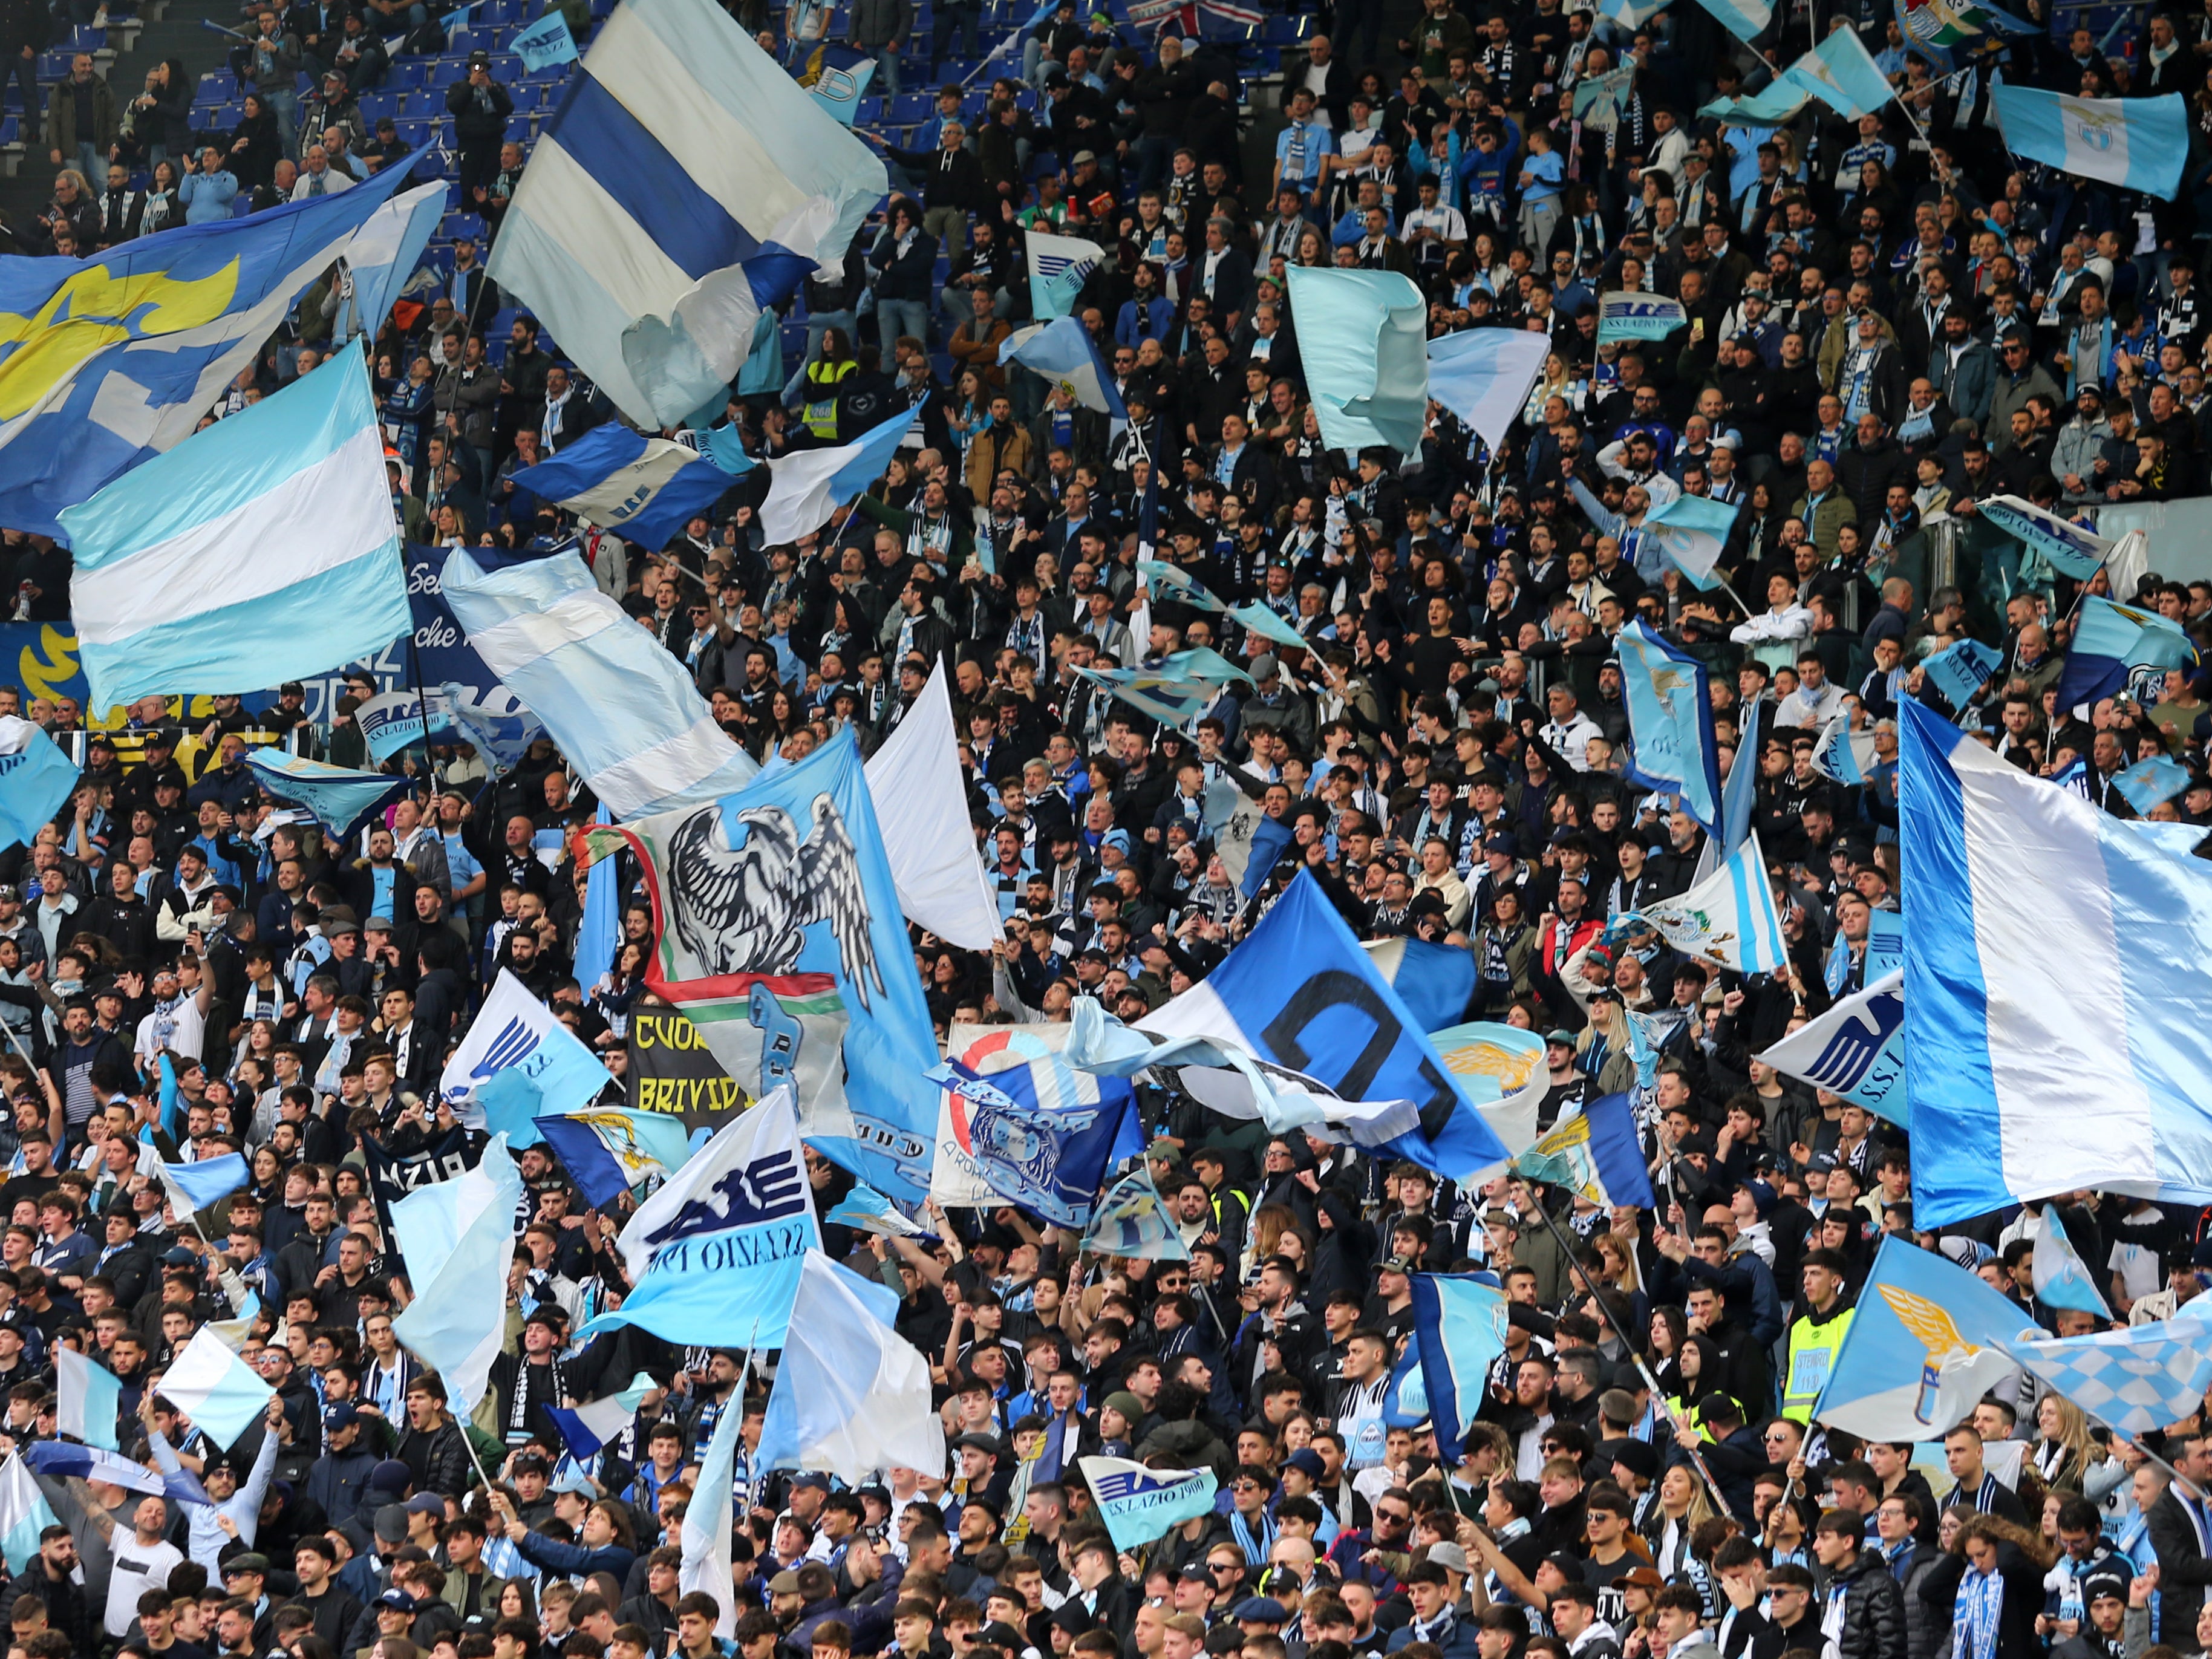 Three Lazio supporters are set to be banned for life after their behaviour during the Rome derby